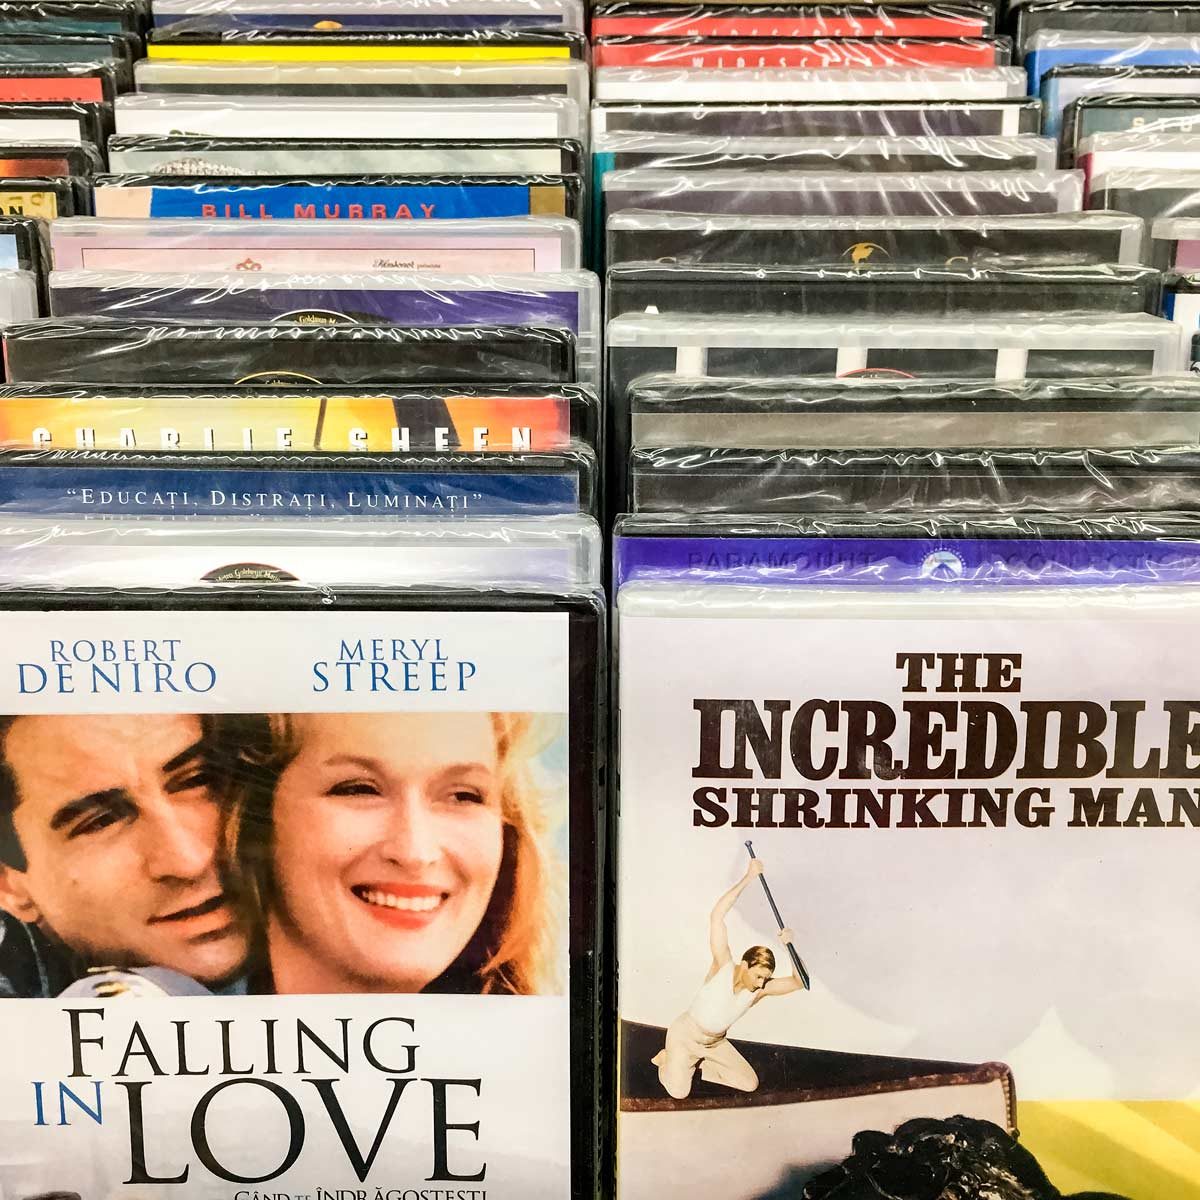 What to Do With Your Old DVD Collection